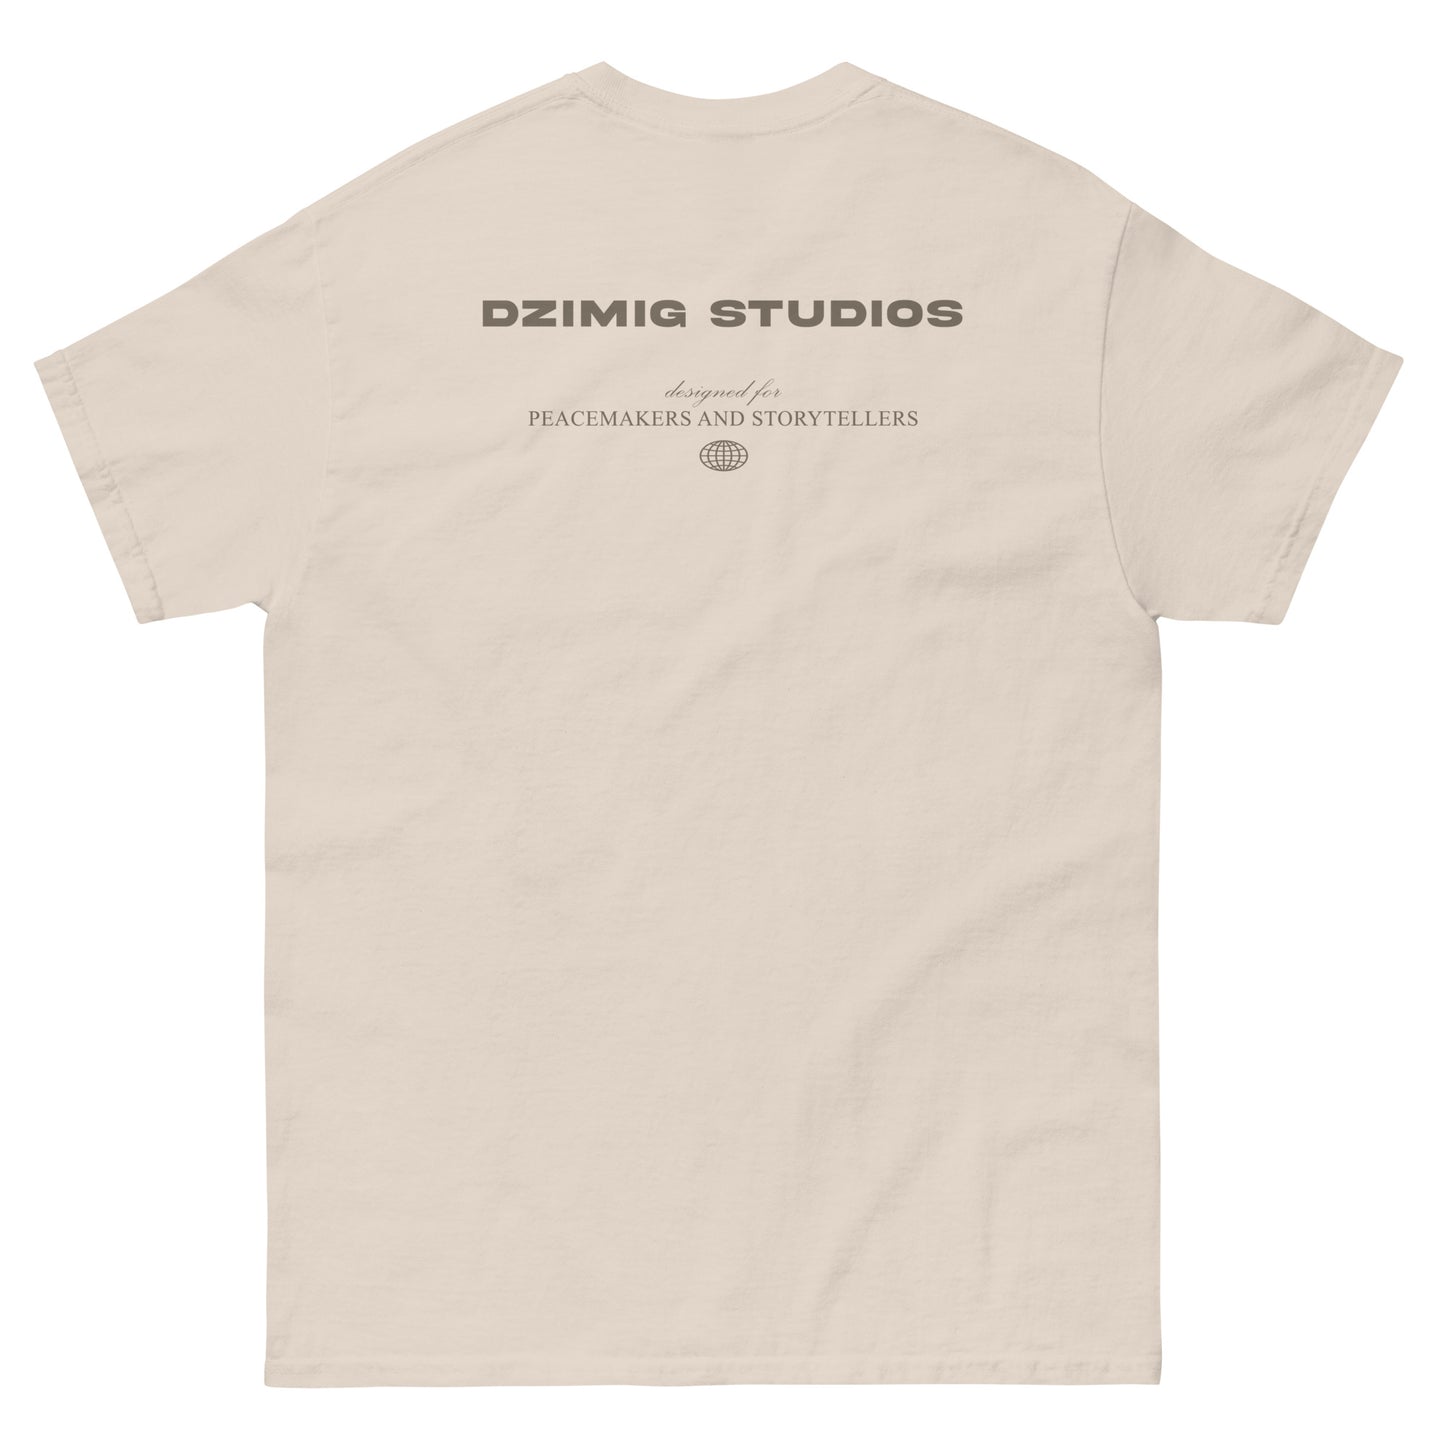 Dzimig Studios' Unisex Classic  Tee perfect for everyday casual wear.  These tees are designed under Dzimig Studios' Peace Campaign Project.